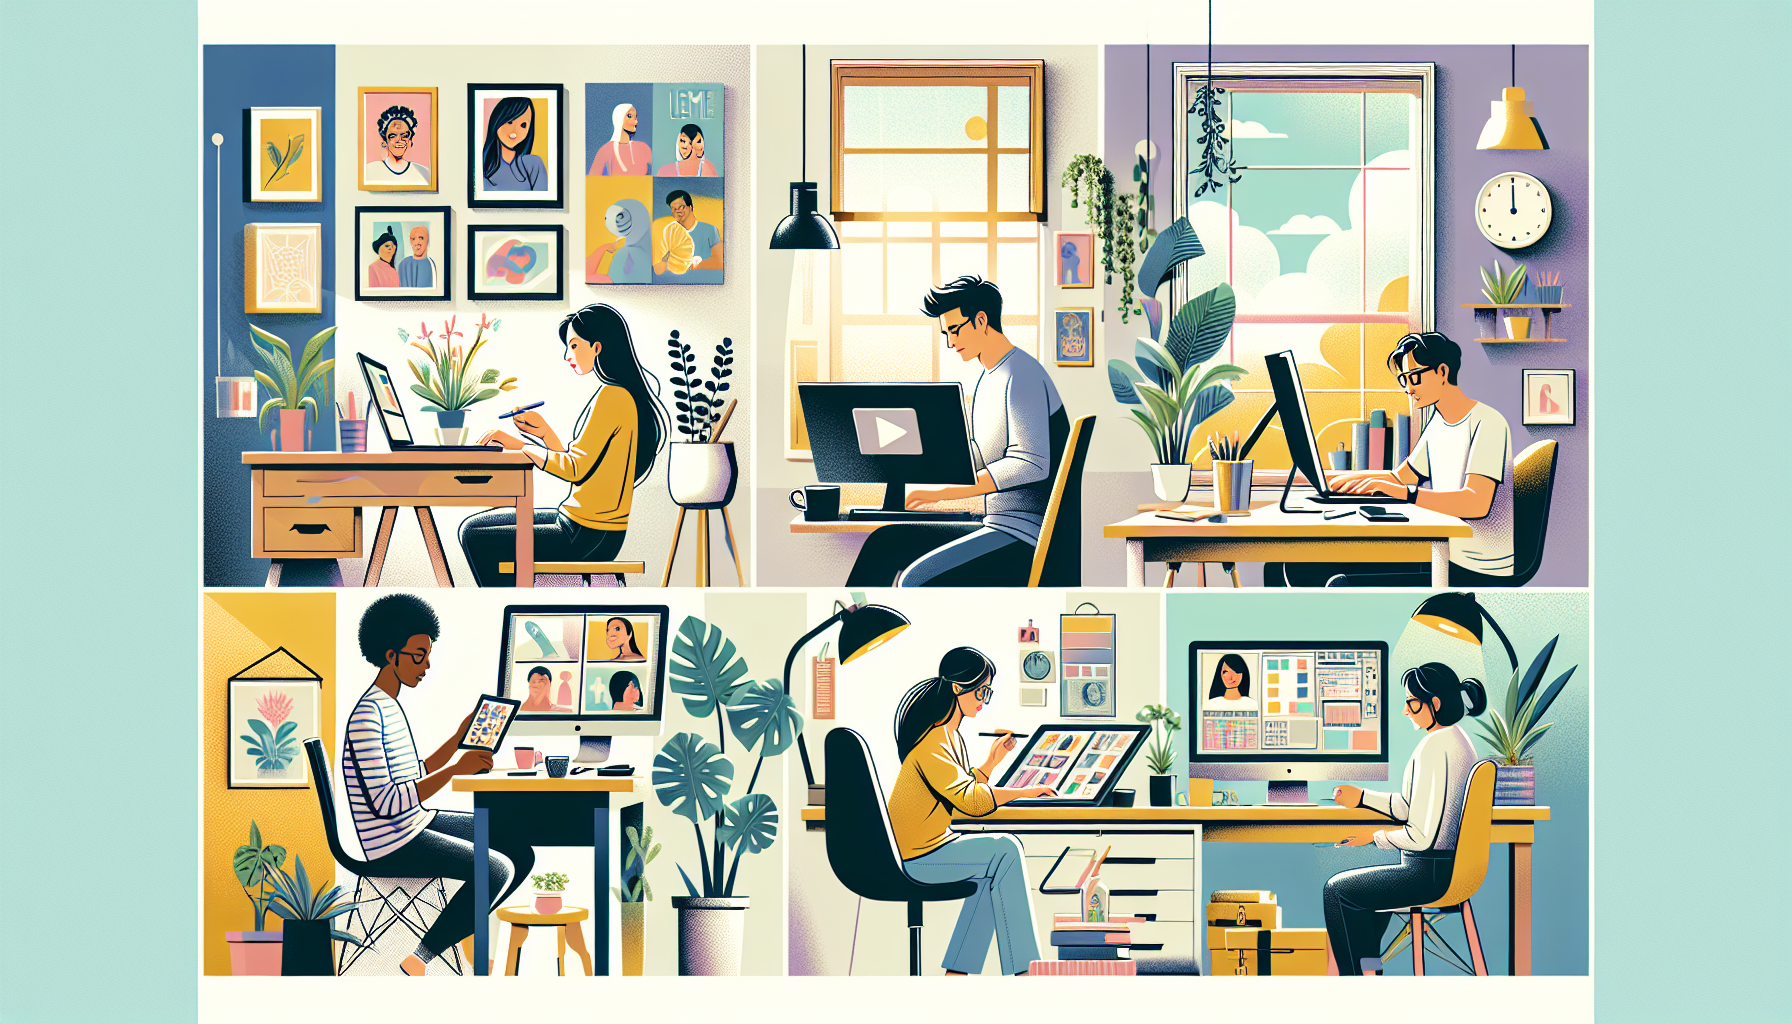 Create an image that showcases a variety of people working from home in different side hustle roles. Include a freelance writer on their laptop with coffee beside them, a virtual assistant organizing tasks on a tablet, an online tutor teaching a student via video call, a graphic designer using a digital drawing tablet, and a social media manager scheduling posts on a desktop computer. The background should be a cozy, productive home workspace with inspirational décor, plants, and natural light streaming through a window.